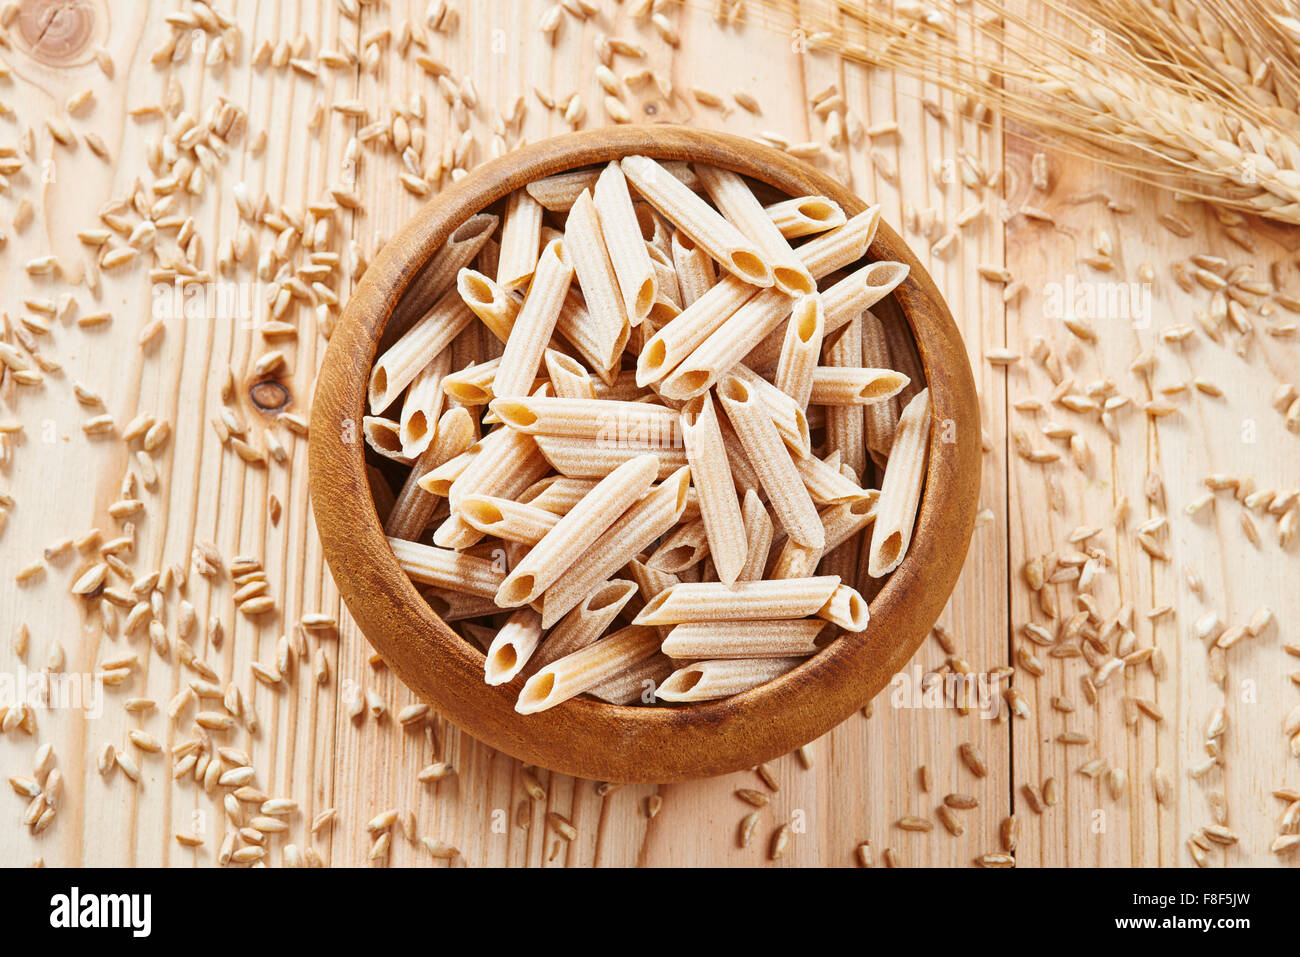 Integral Pasta High Resolution Stock Photography and Images - Alamy